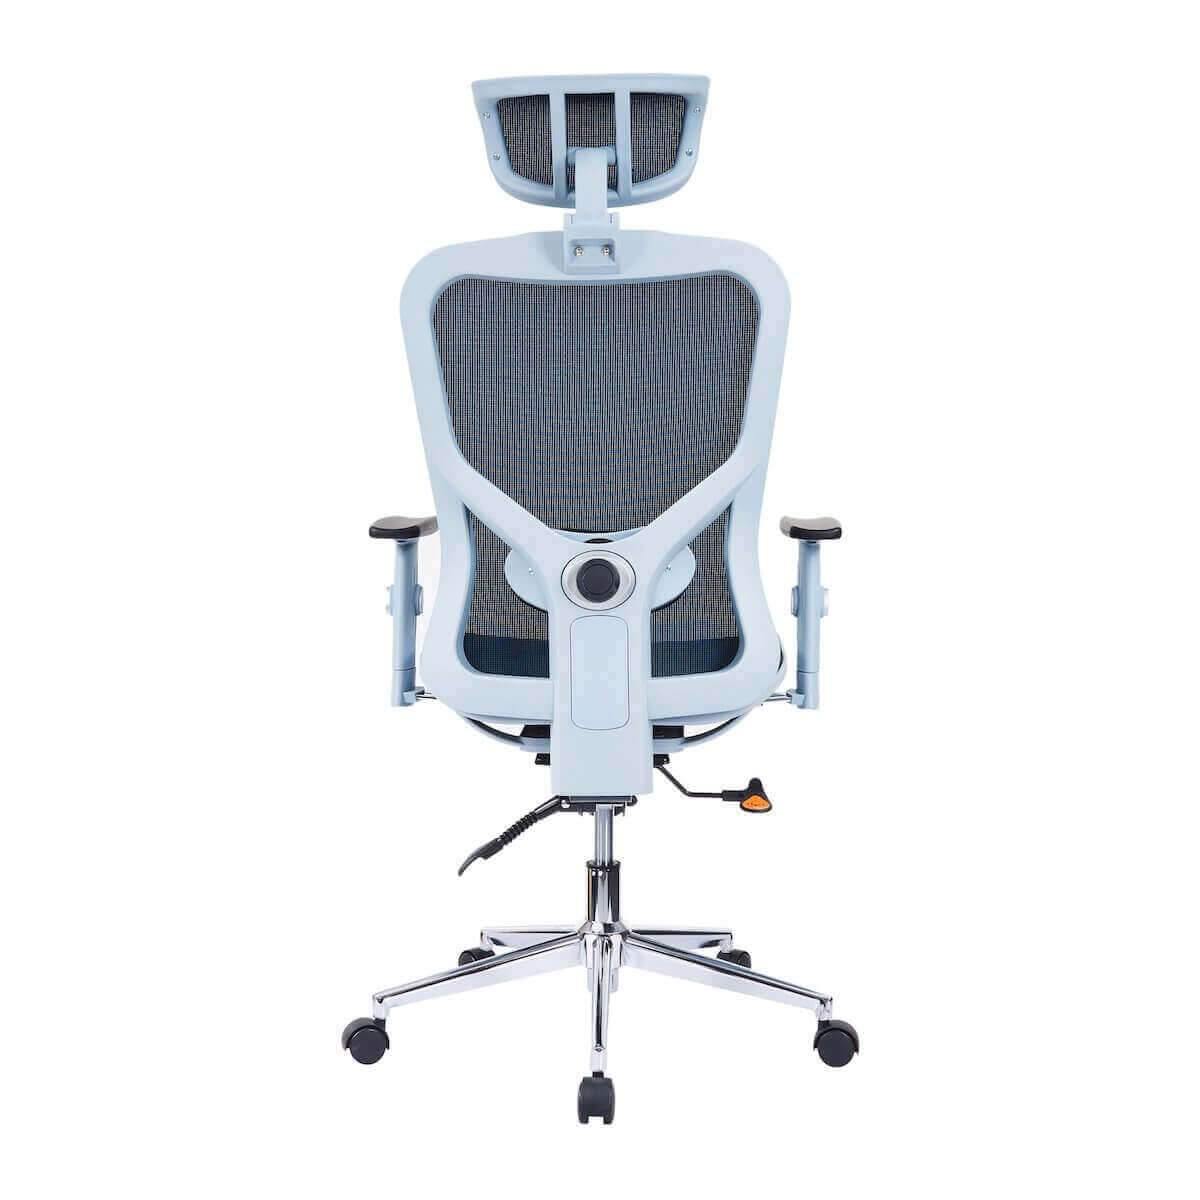 Techni Mobili Blue High Back Executive Mesh Office Chair with Arms, Headrest, and Lumbar Support RTA-1008-BL Back